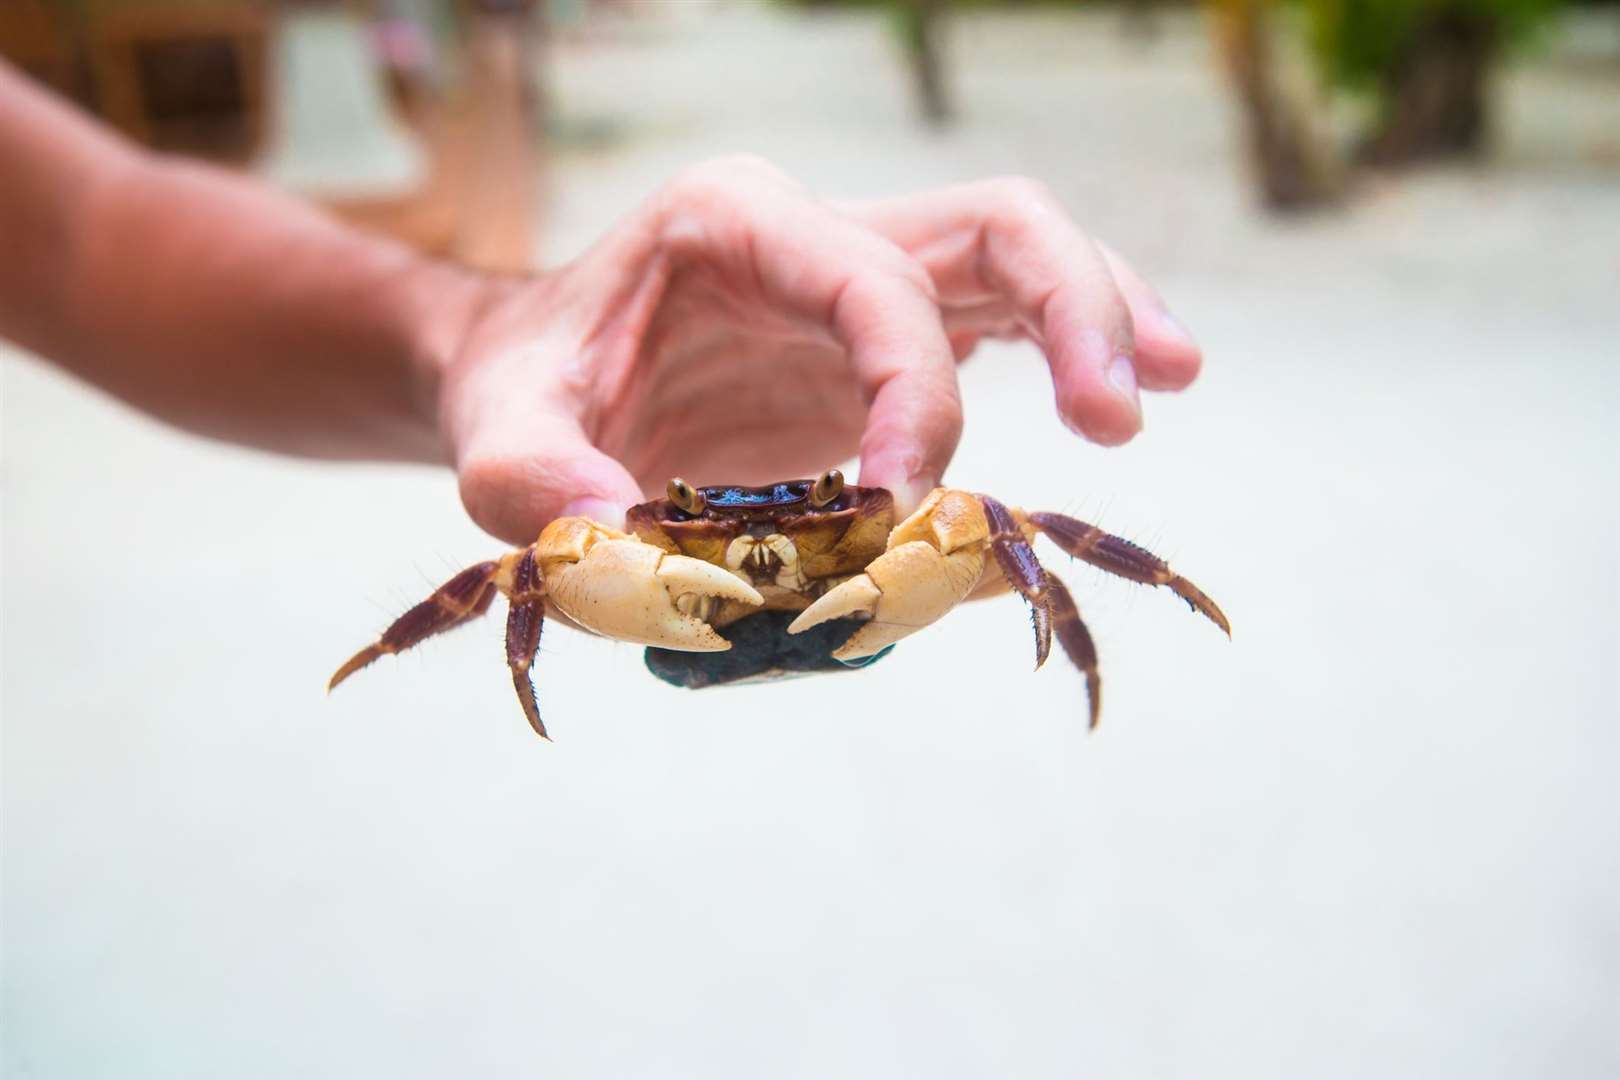 Crabbing in Kent is an activity that costs very little